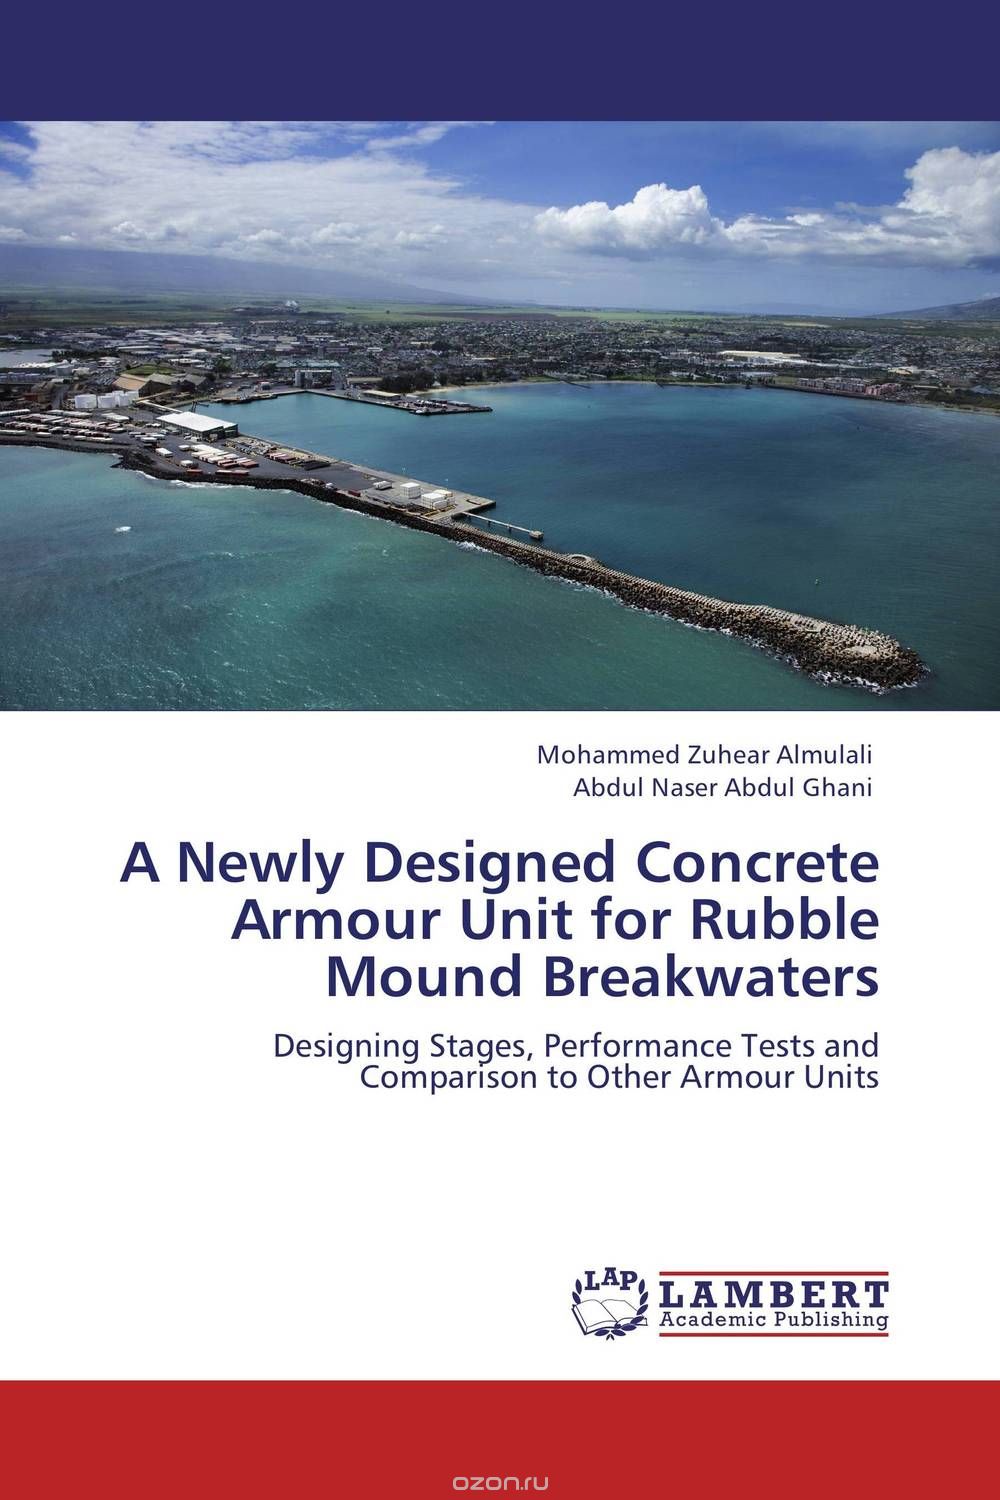 A Newly Designed Concrete Armour Unit for Rubble Mound Breakwaters